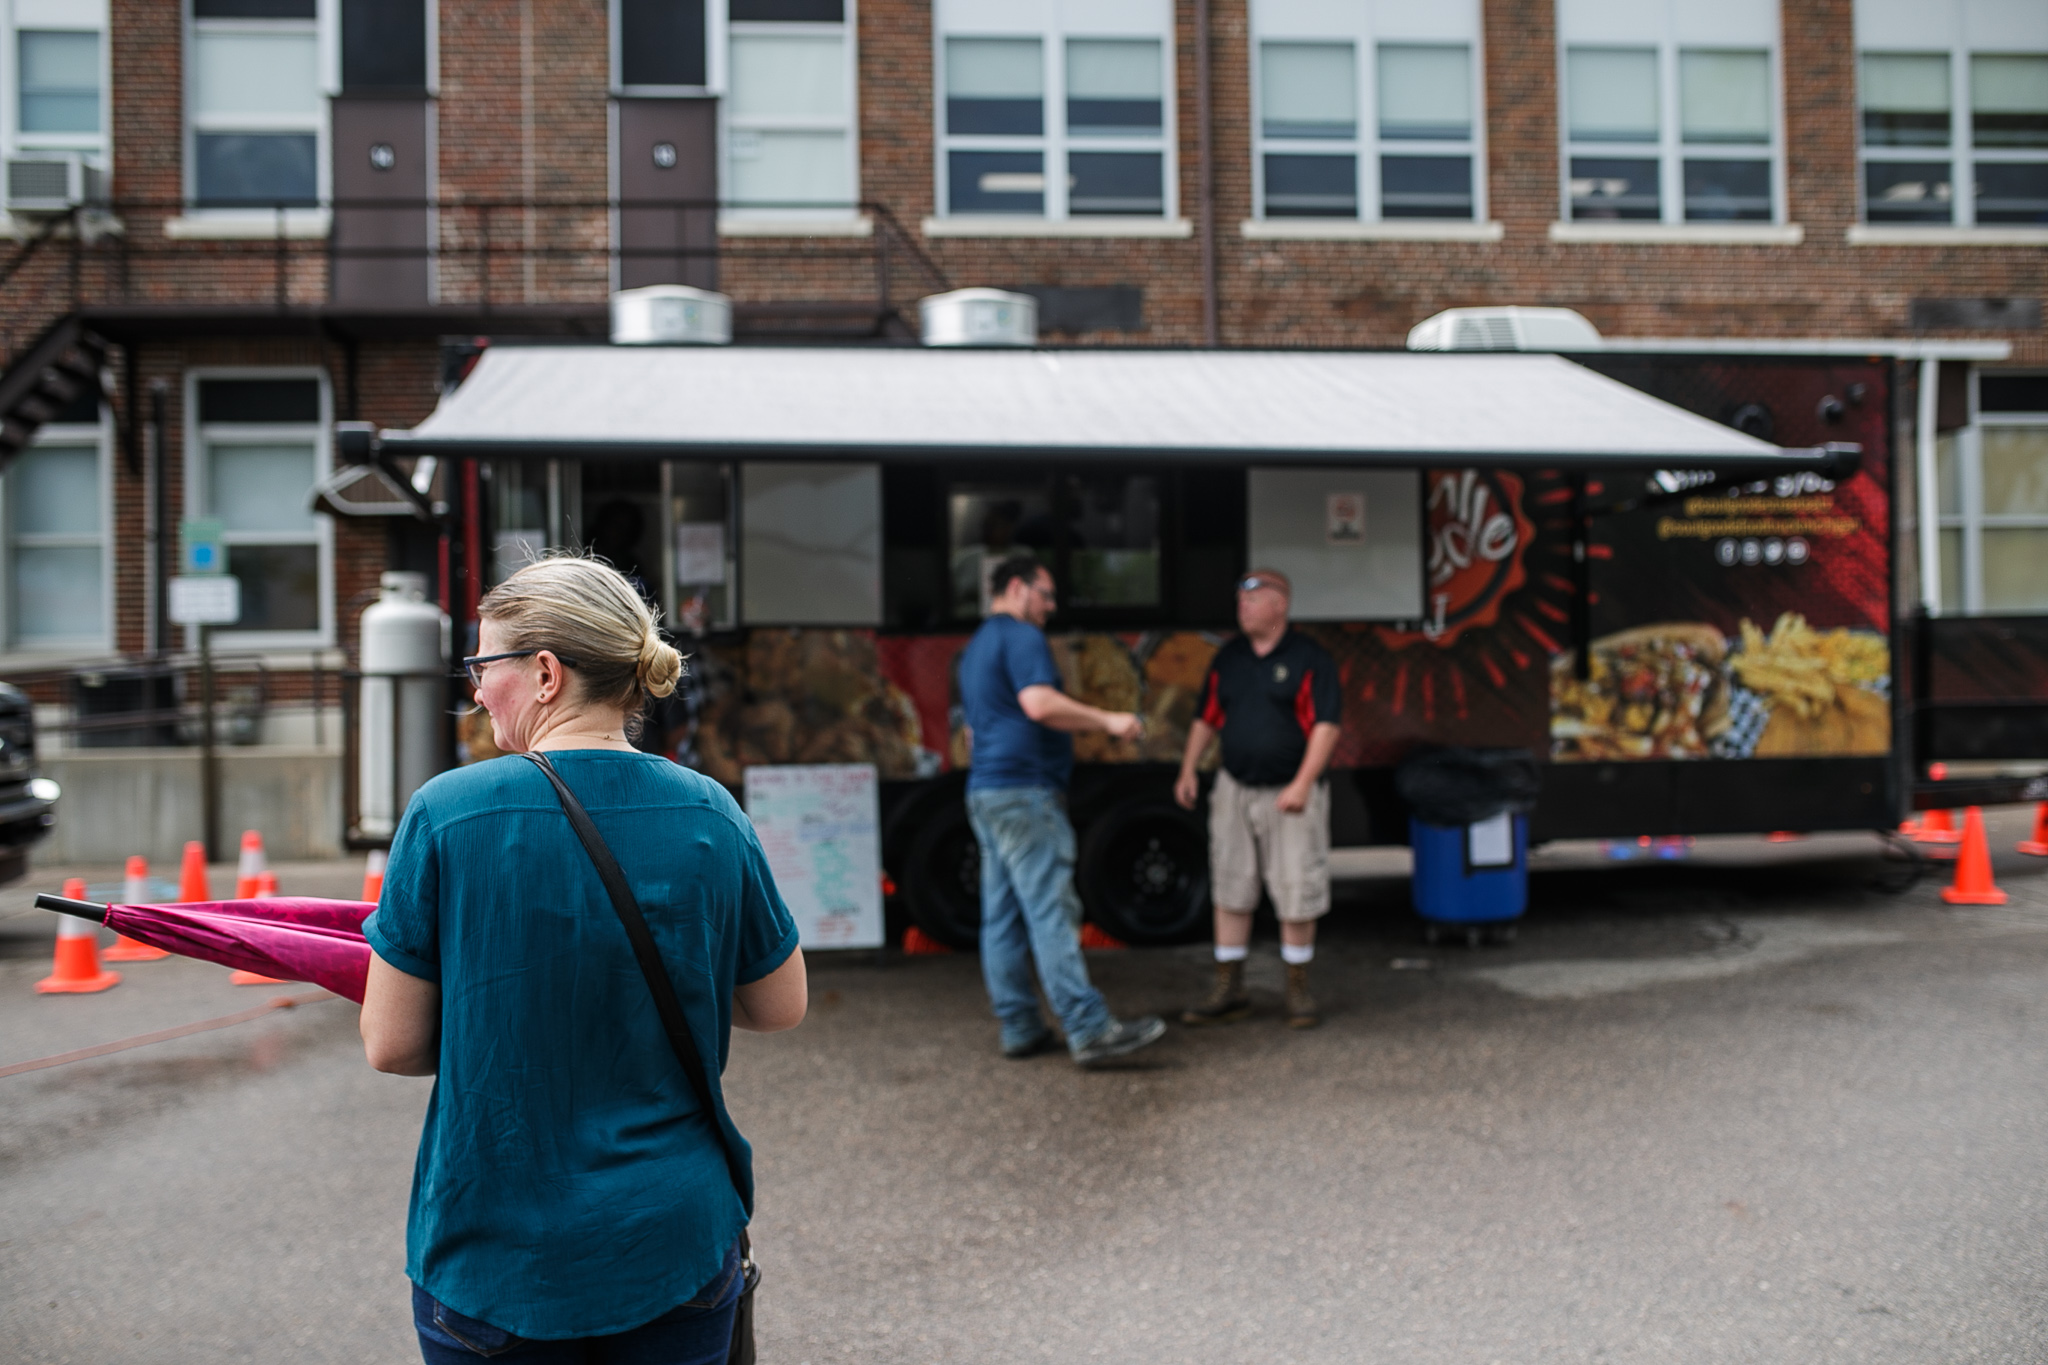 Attendants wait in line next to multiple food trucks during the Perry Center Centennial Event in Grand Blanc on Saturday, May 14, 2022. (Jenifer Veloso | MLive.com)